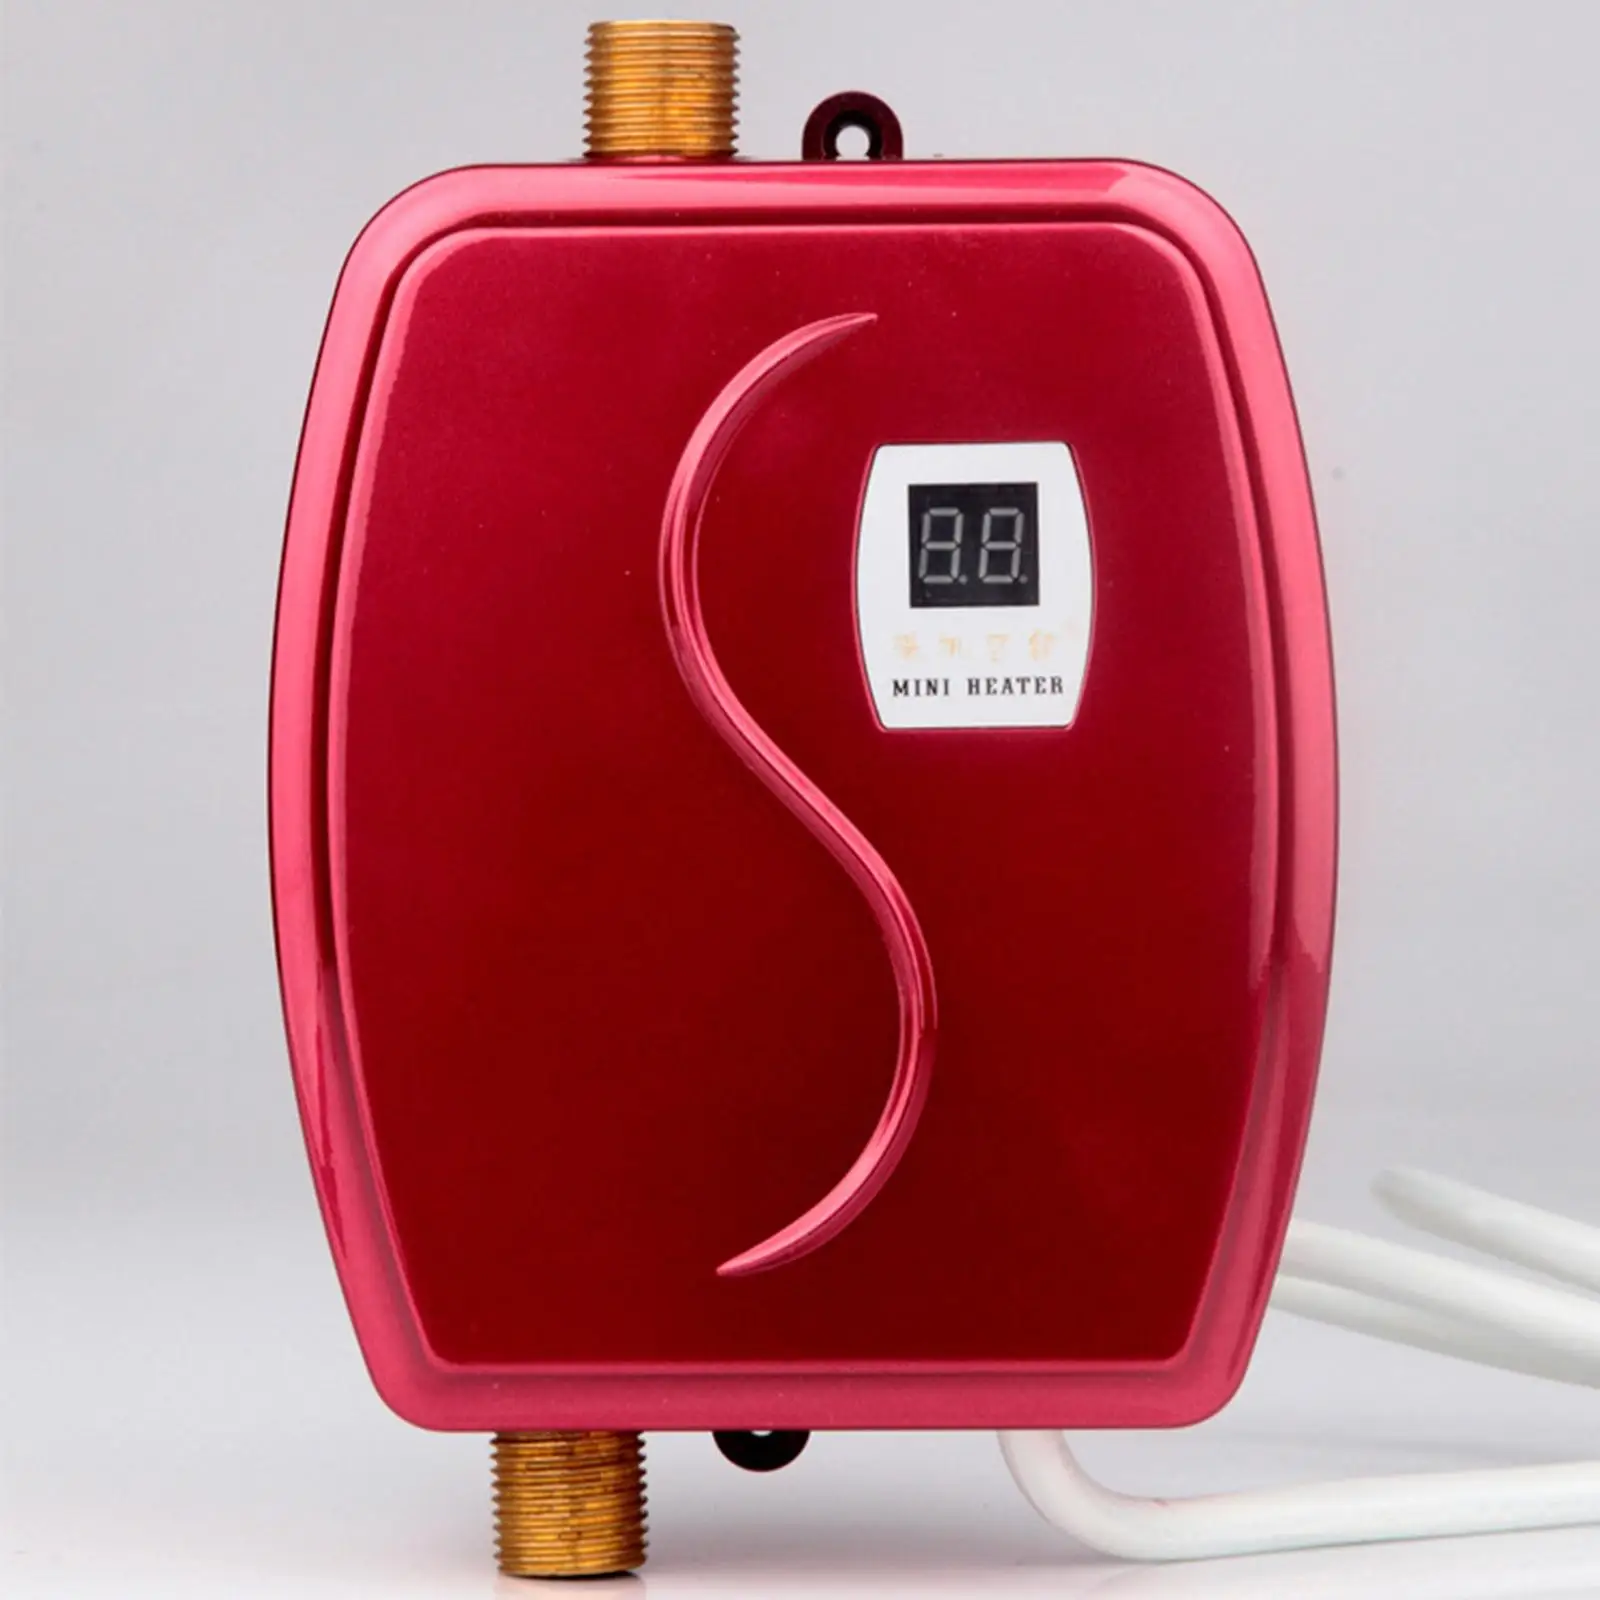 Red 110V 3000W Mini Electric Hot Water Heater Bathroom Kitchen Tankless Instant Water Heater 